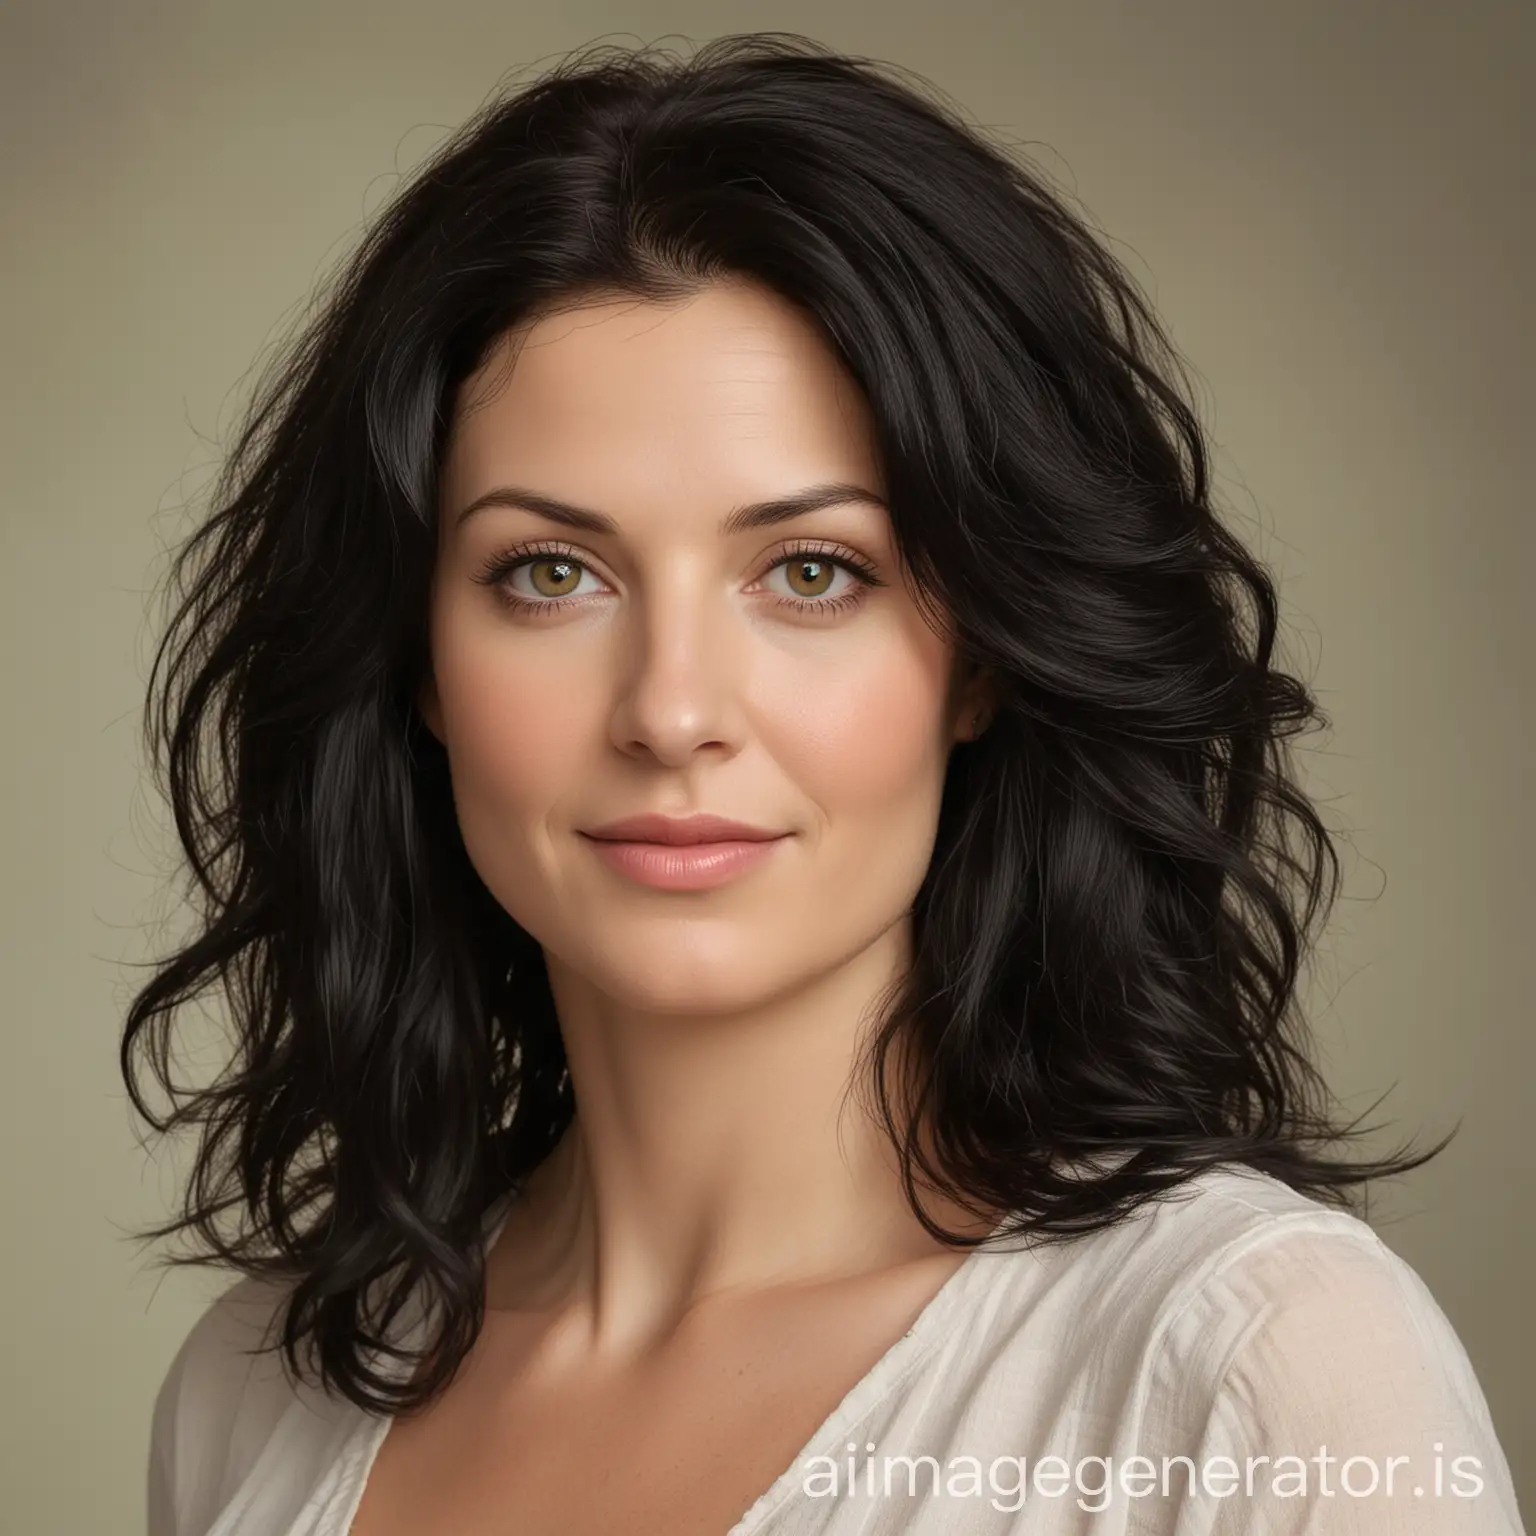 In color, make a fully clothed beautiful 35 year old, 5' 6" 128 pound White woman soft wavy shoulder length black hair, with kind eyes, neutral background